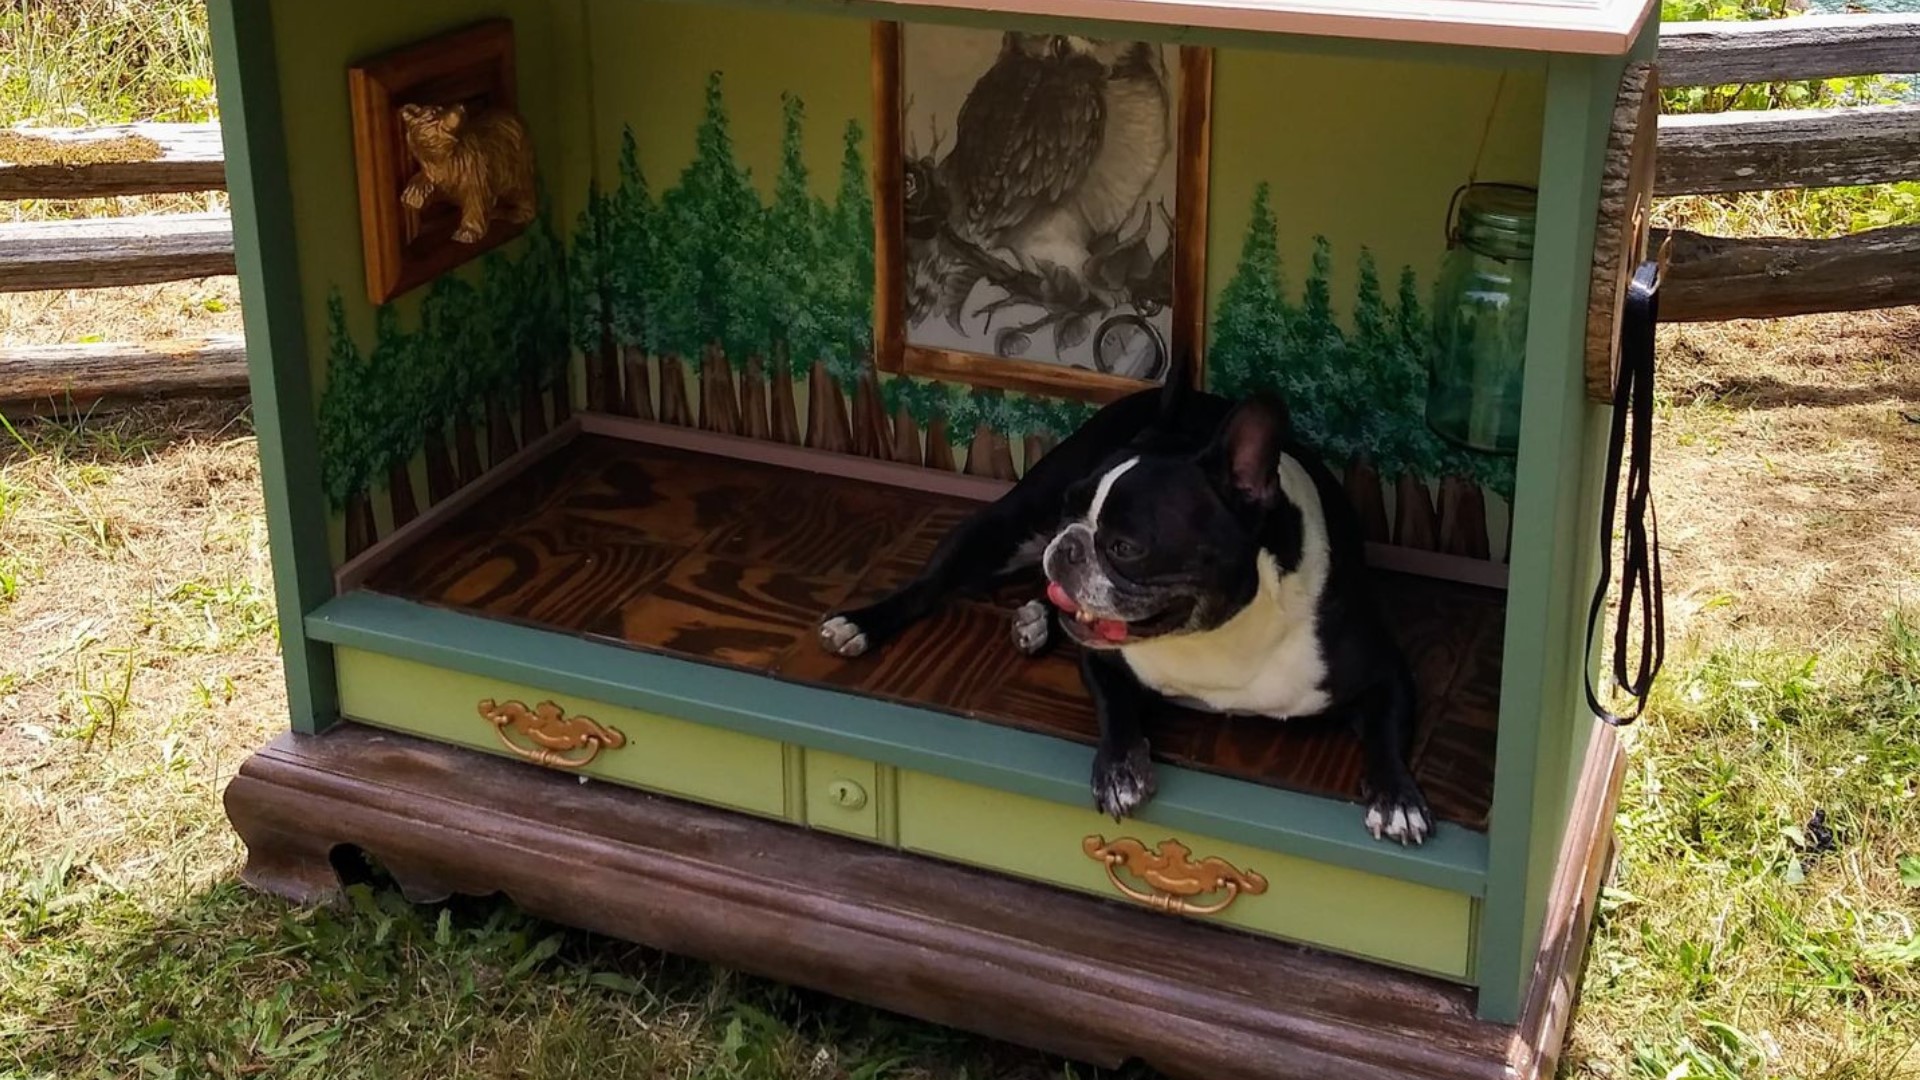 Jackson Isborn from Citrus Heights creates unique, themed pet homes out of old television consoles.